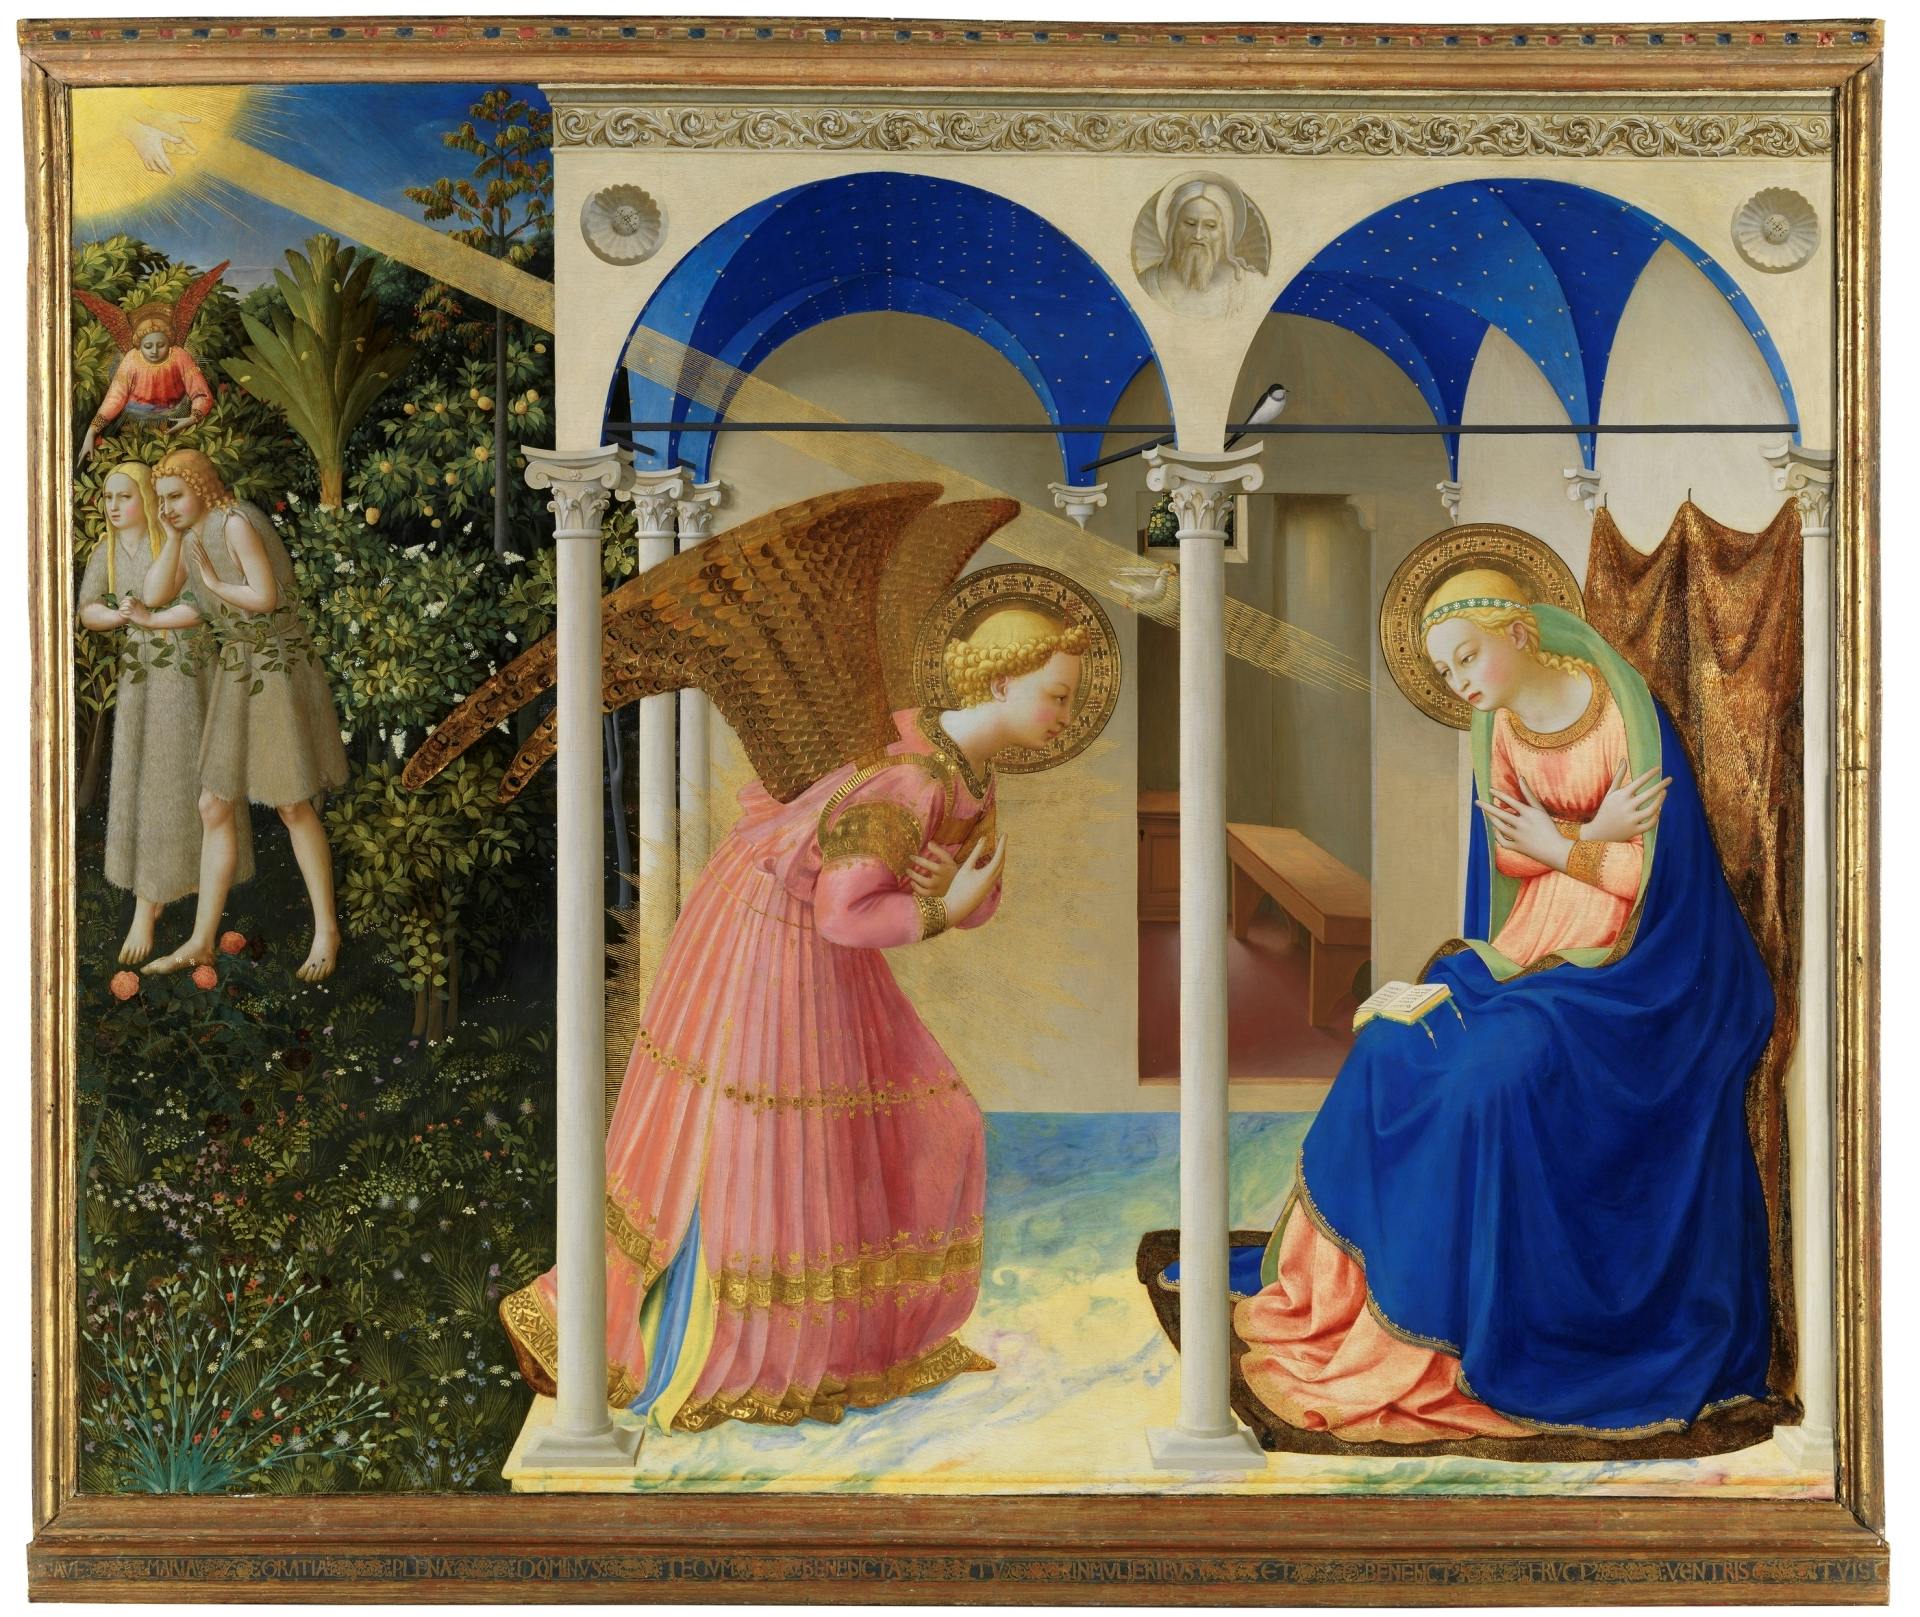 In this Annunciation, by Fra Angelico in the 1420s, God is a golden sun, and his divine message a beam of light